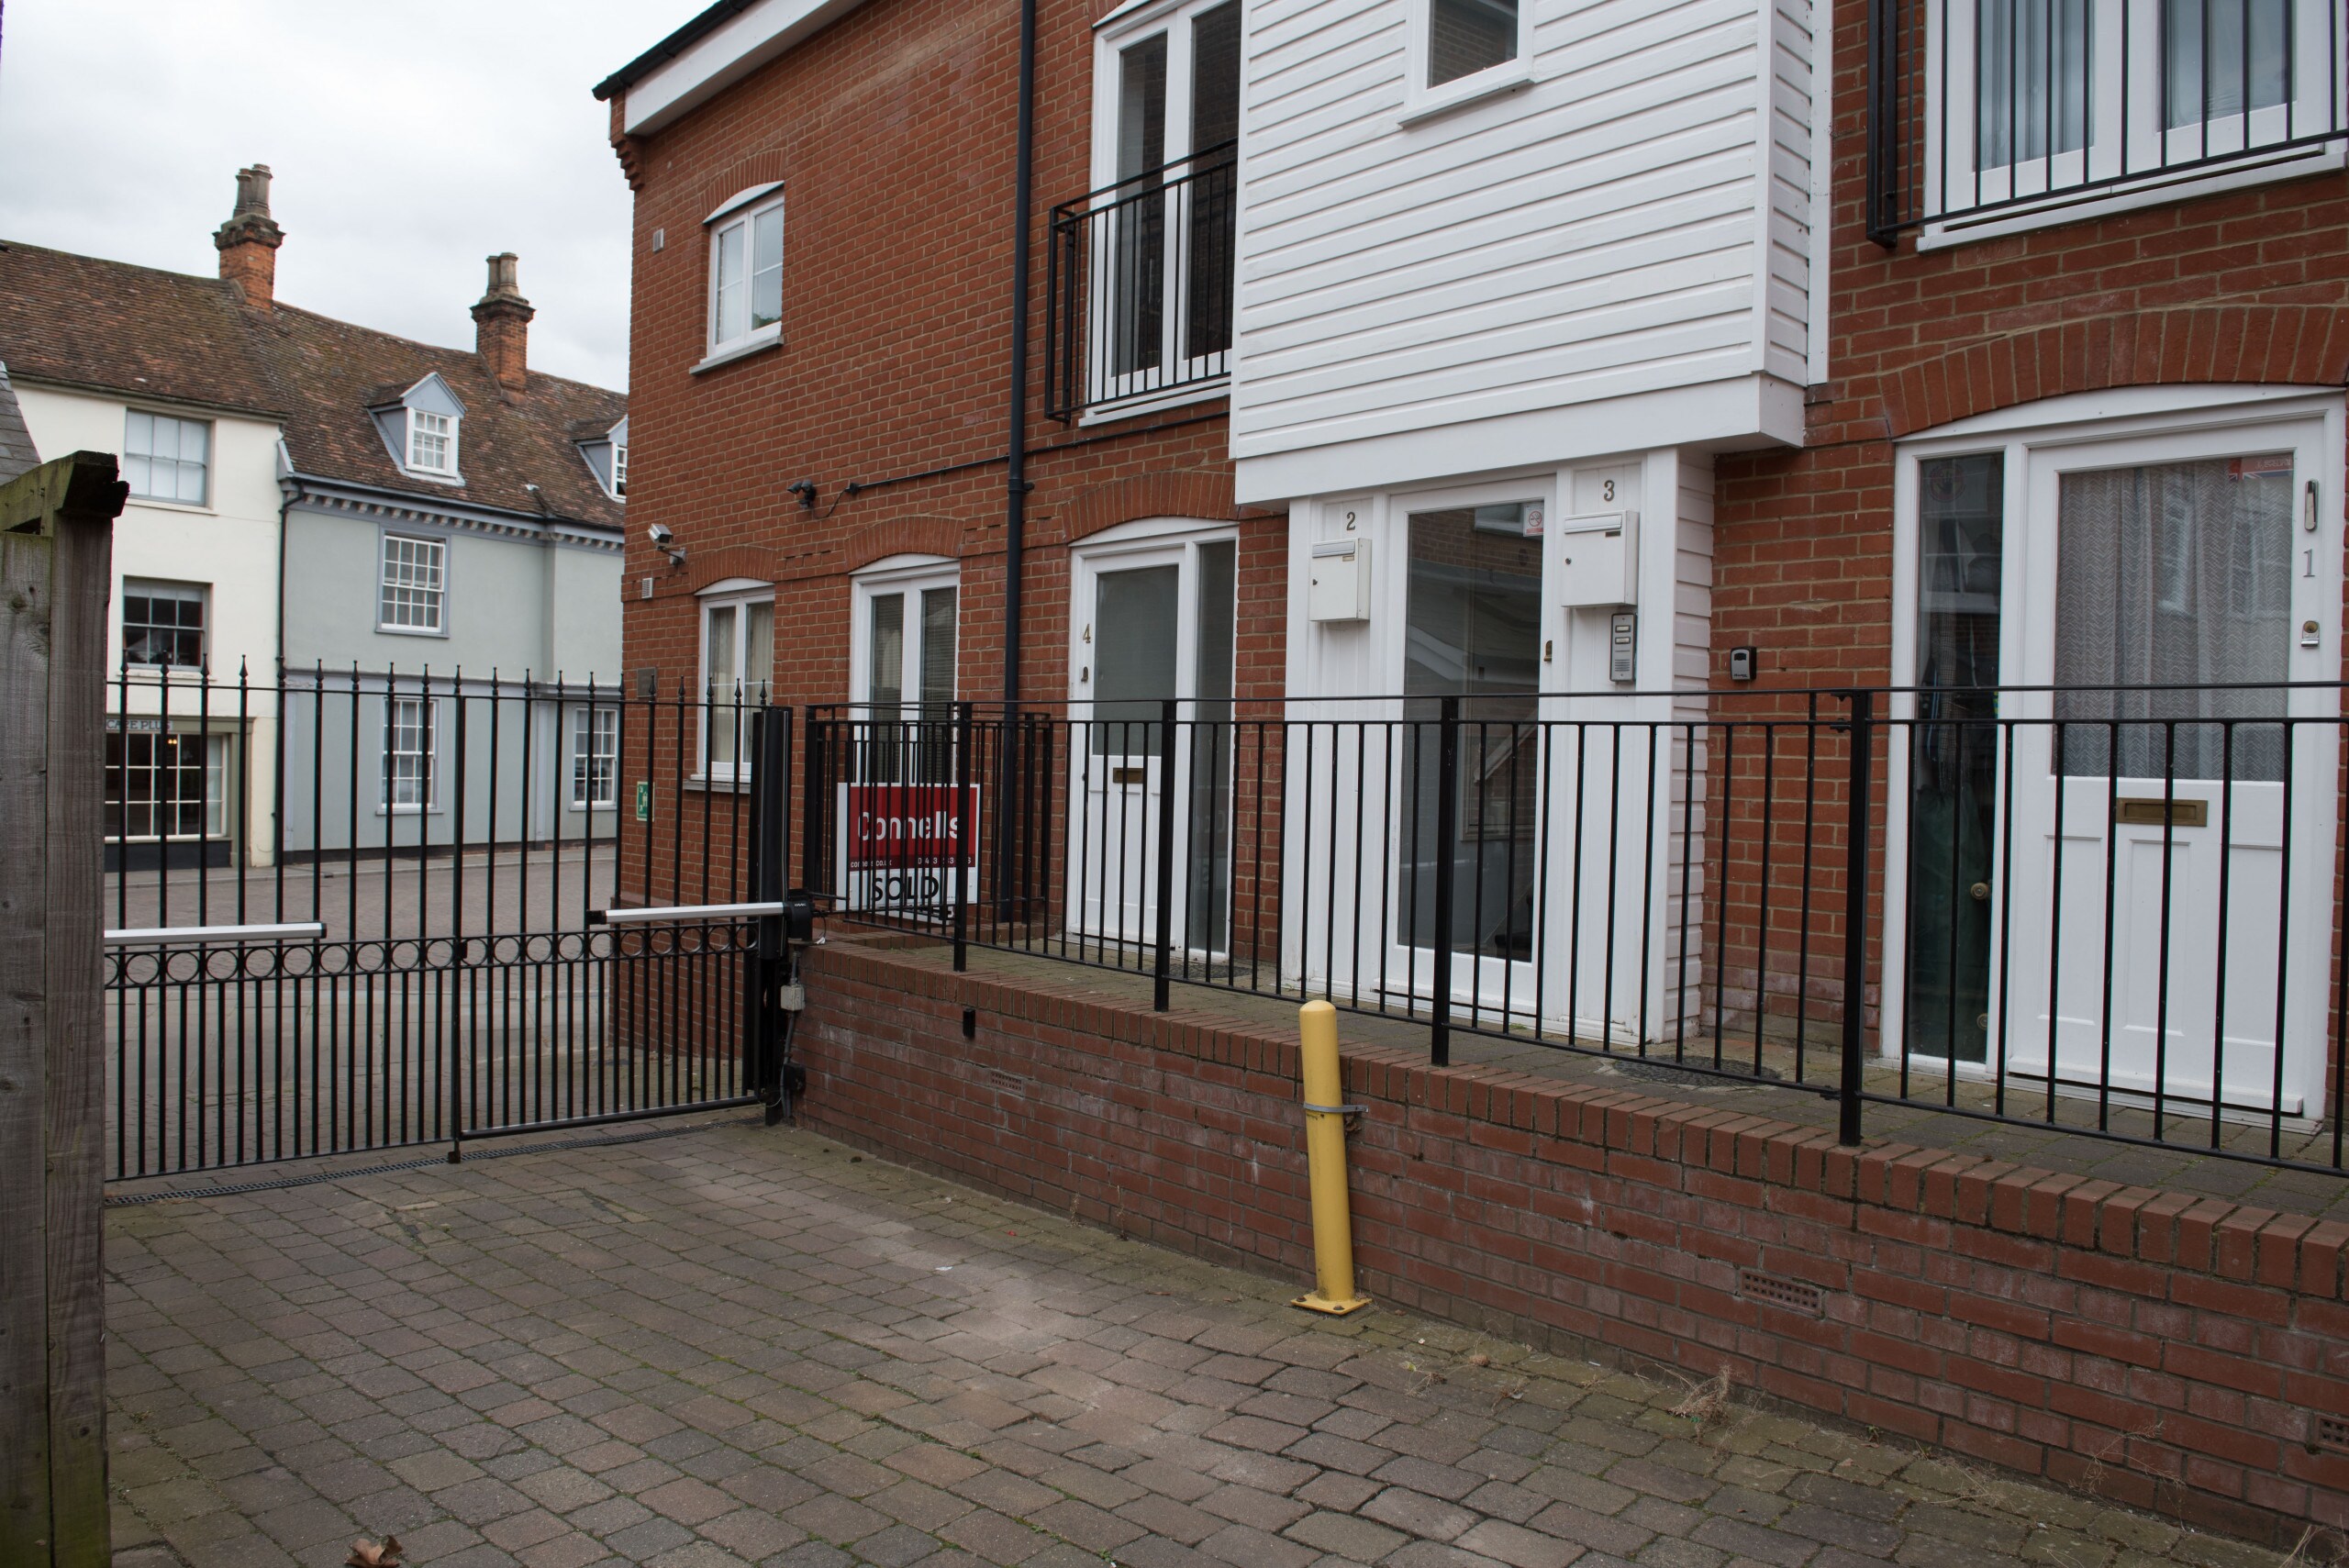 1 Bedroom Ground Floor, Central East Ipswich, near to Waterfront area, allocated parking space in gated outdoor car park